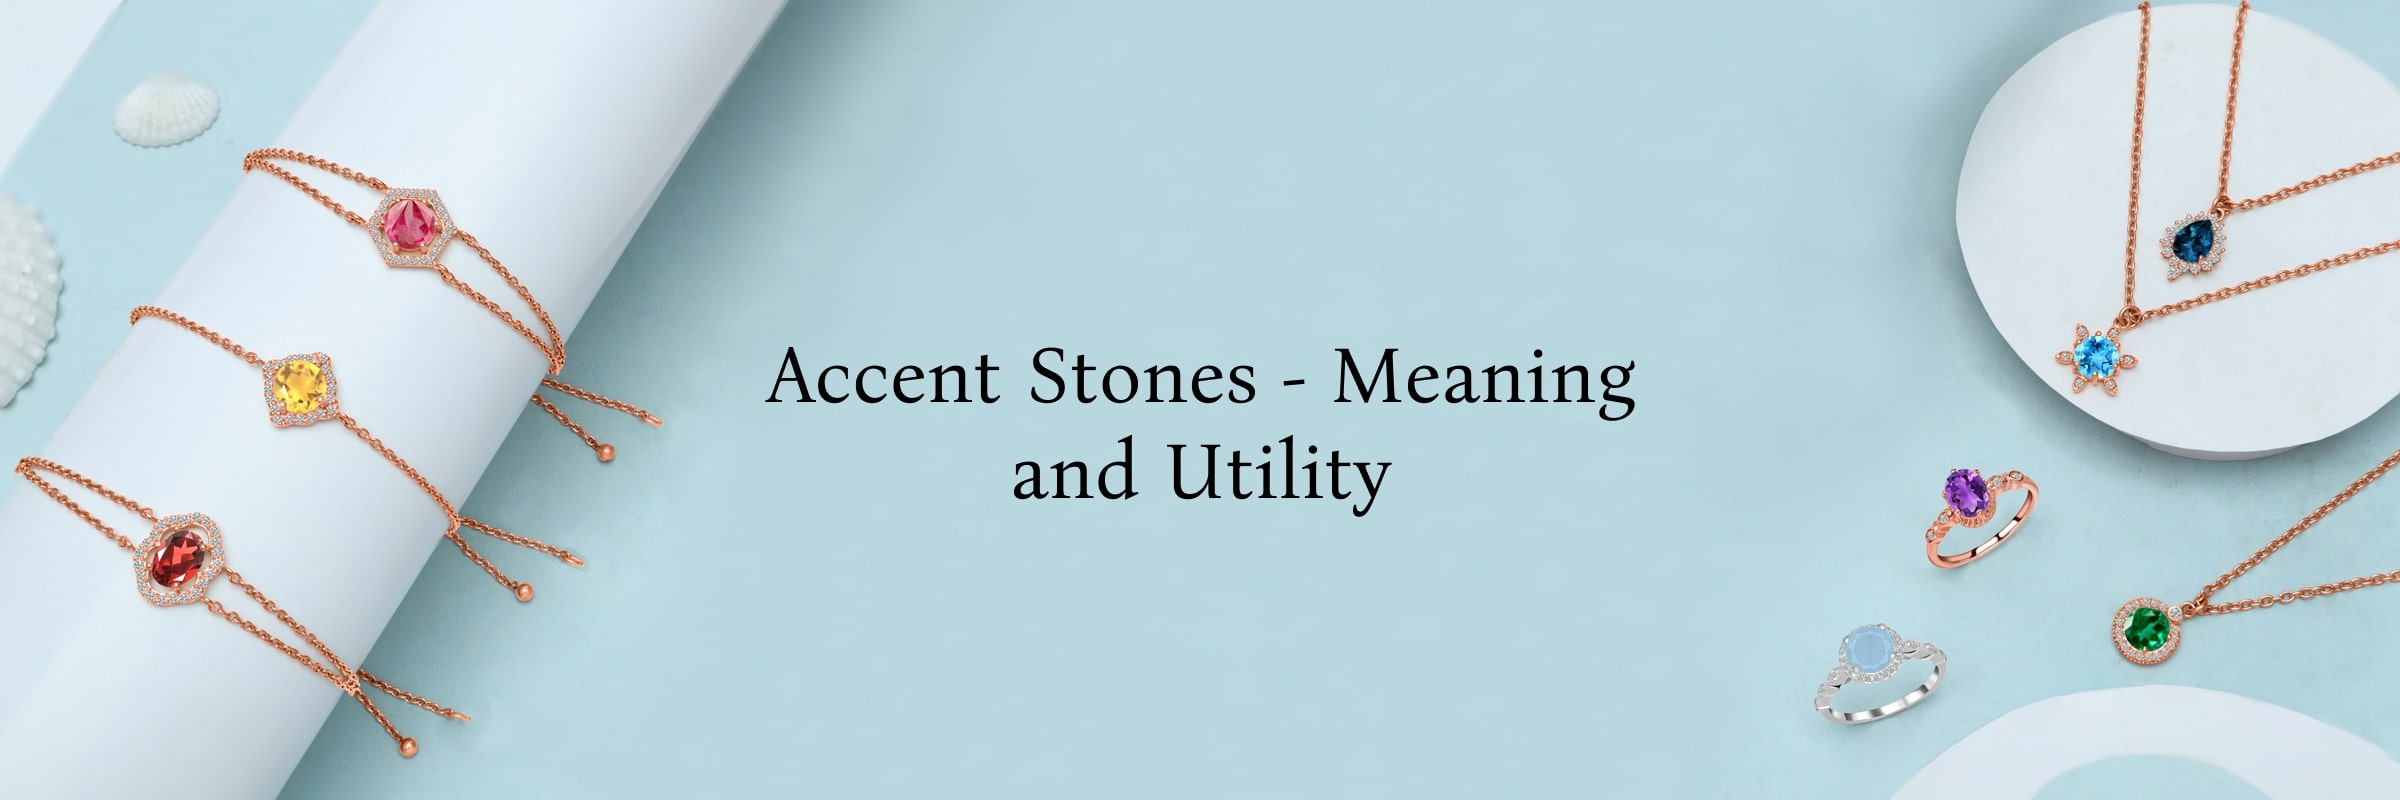 What is an Accent Stone?